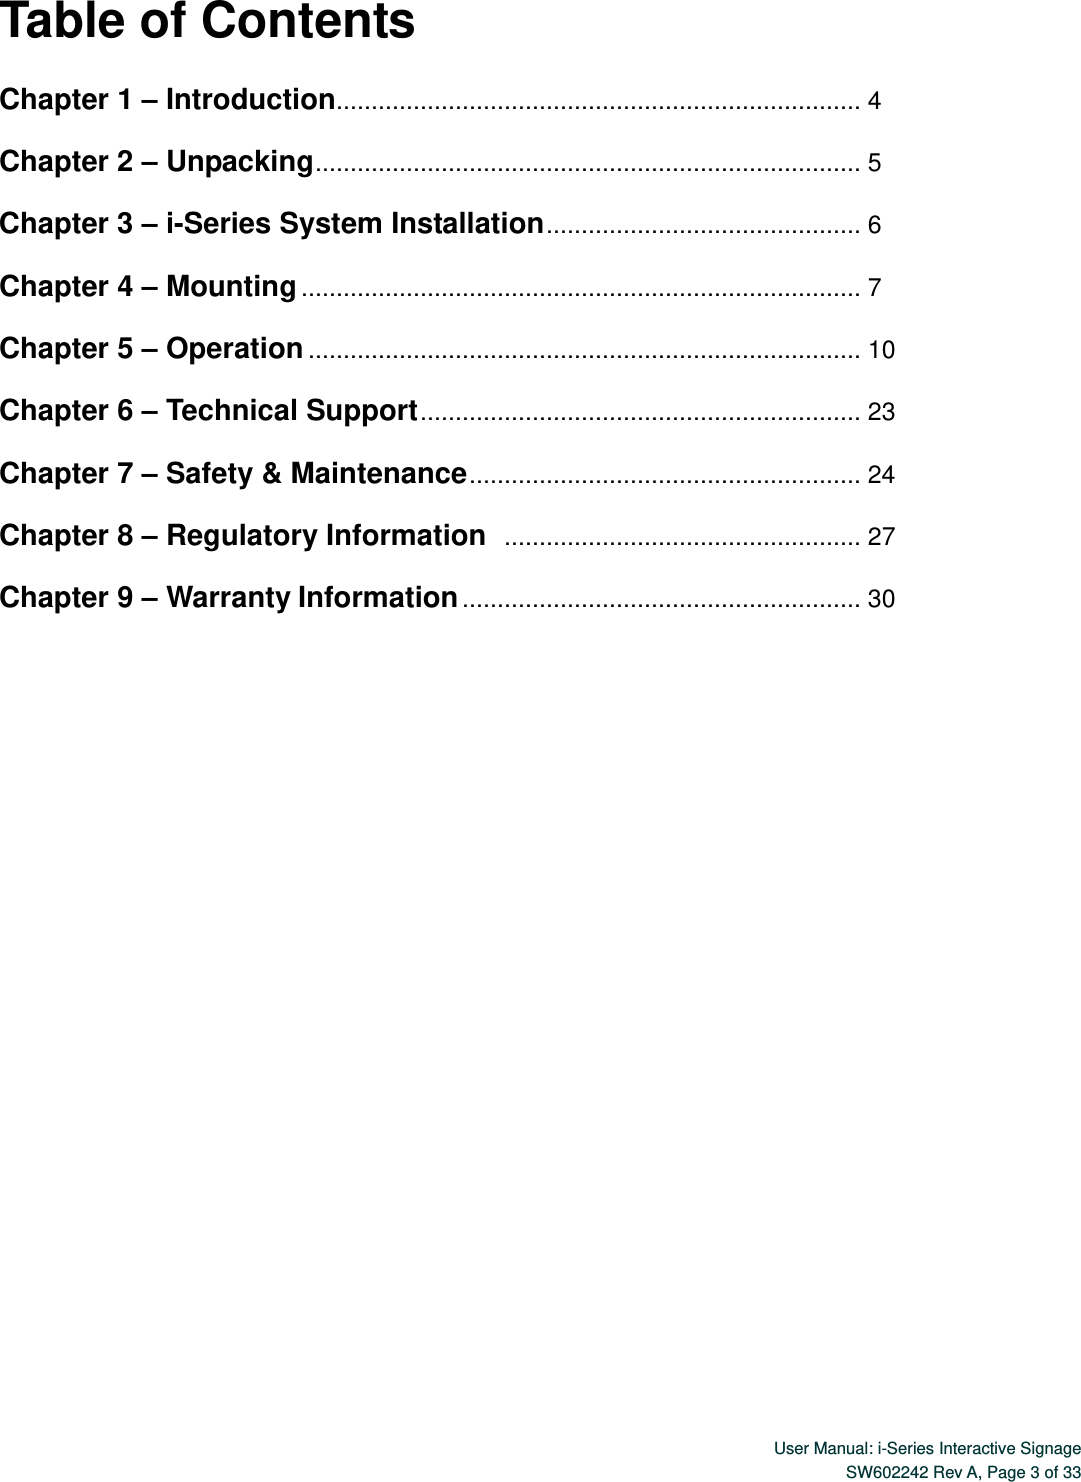  User Manual: i-Series Interactive Signage SW602242 Rev A, Page 3 of 33   Table of Contents  Chapter 1 – Introduction........................................................................... 4  Chapter 2 – Unpacking .............................................................................. 5  Chapter 3 – i-Series System Installation ............................................. 6  Chapter 4 – Mounting ................................................................................ 7  Chapter 5 – Operation ............................................................................... 10  Chapter 6 – Technical Support ............................................................... 23  Chapter 7 – Safety &amp; Maintenance ........................................................ 24  Chapter 8 – Regulatory Information  ................................................... 27  Chapter 9 – Warranty Information ......................................................... 30 